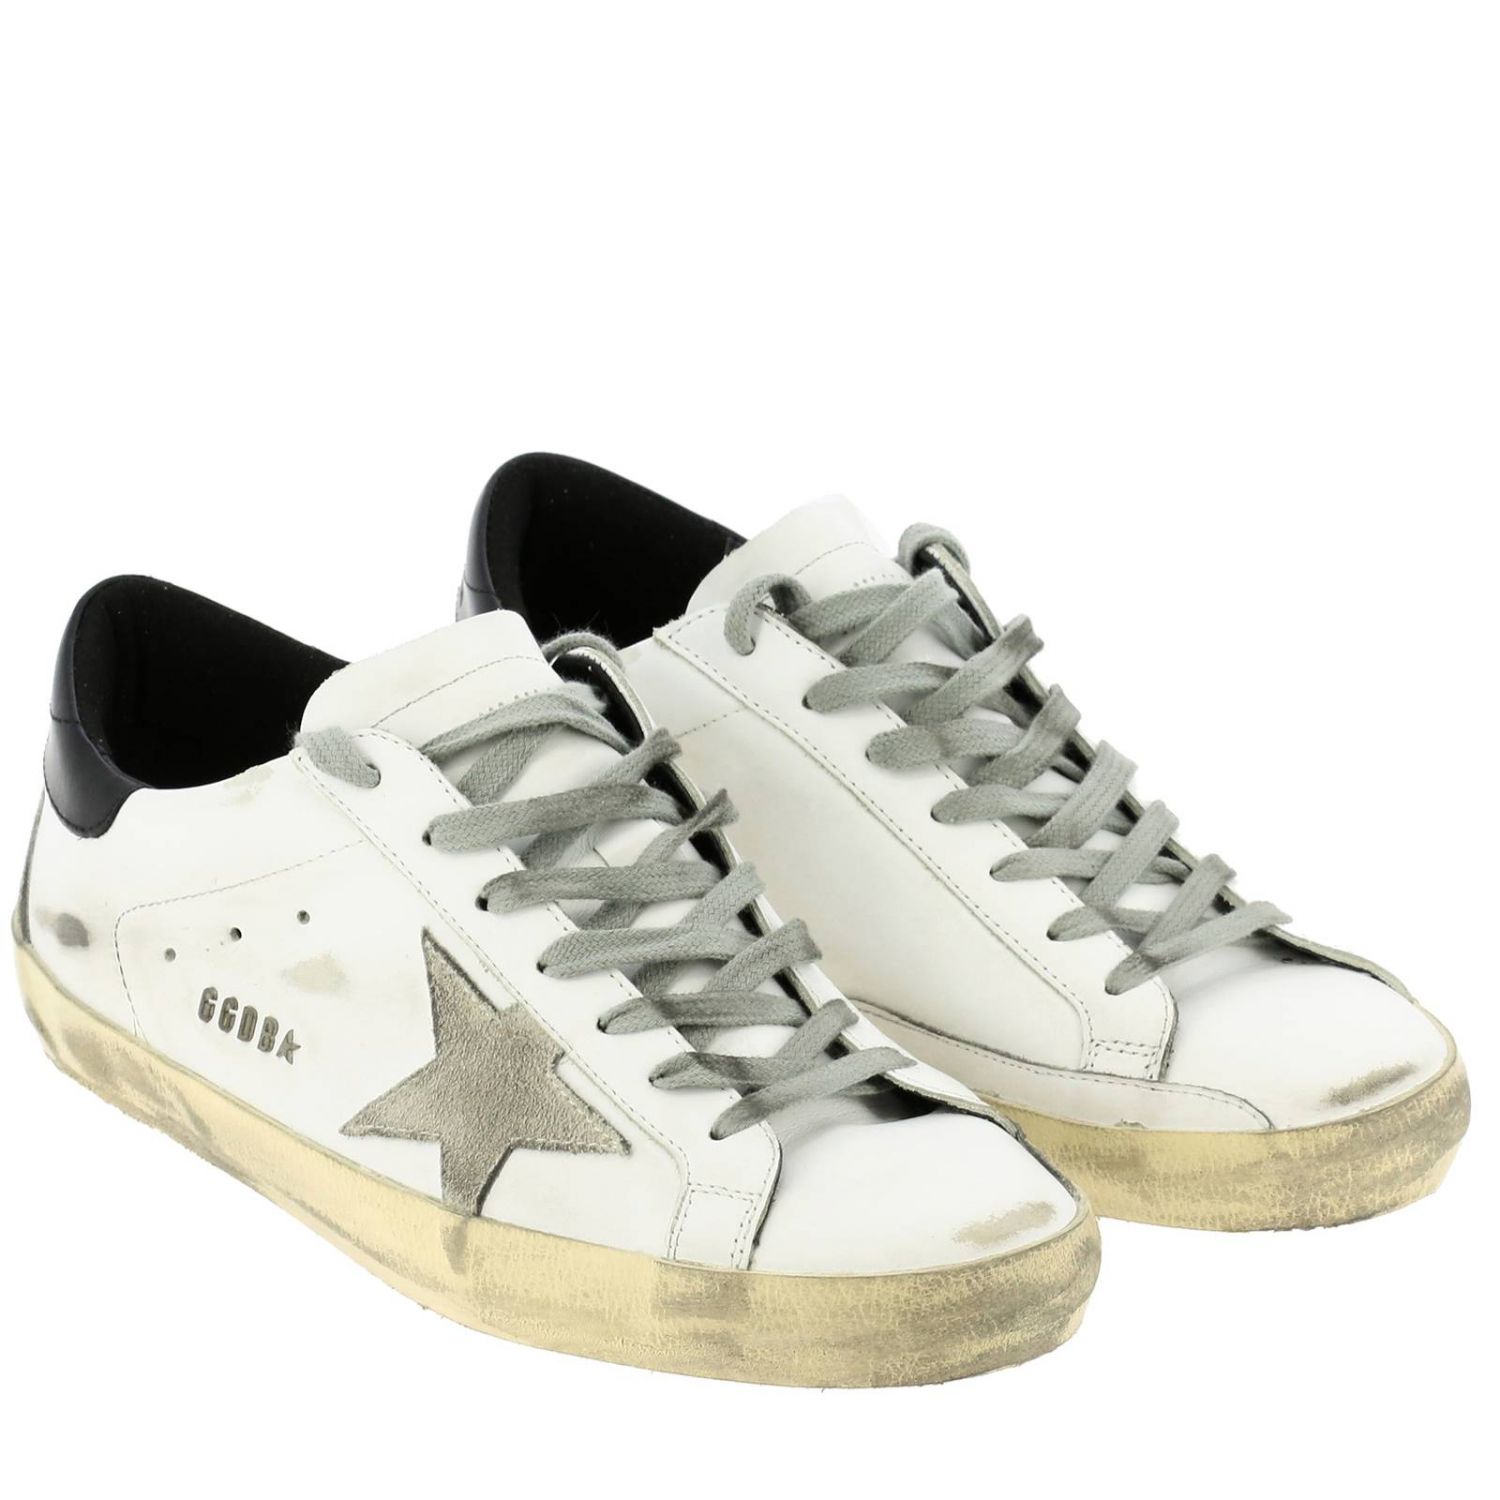 Golden Goose Outlet: Superstar leather sneakers with suede star ...